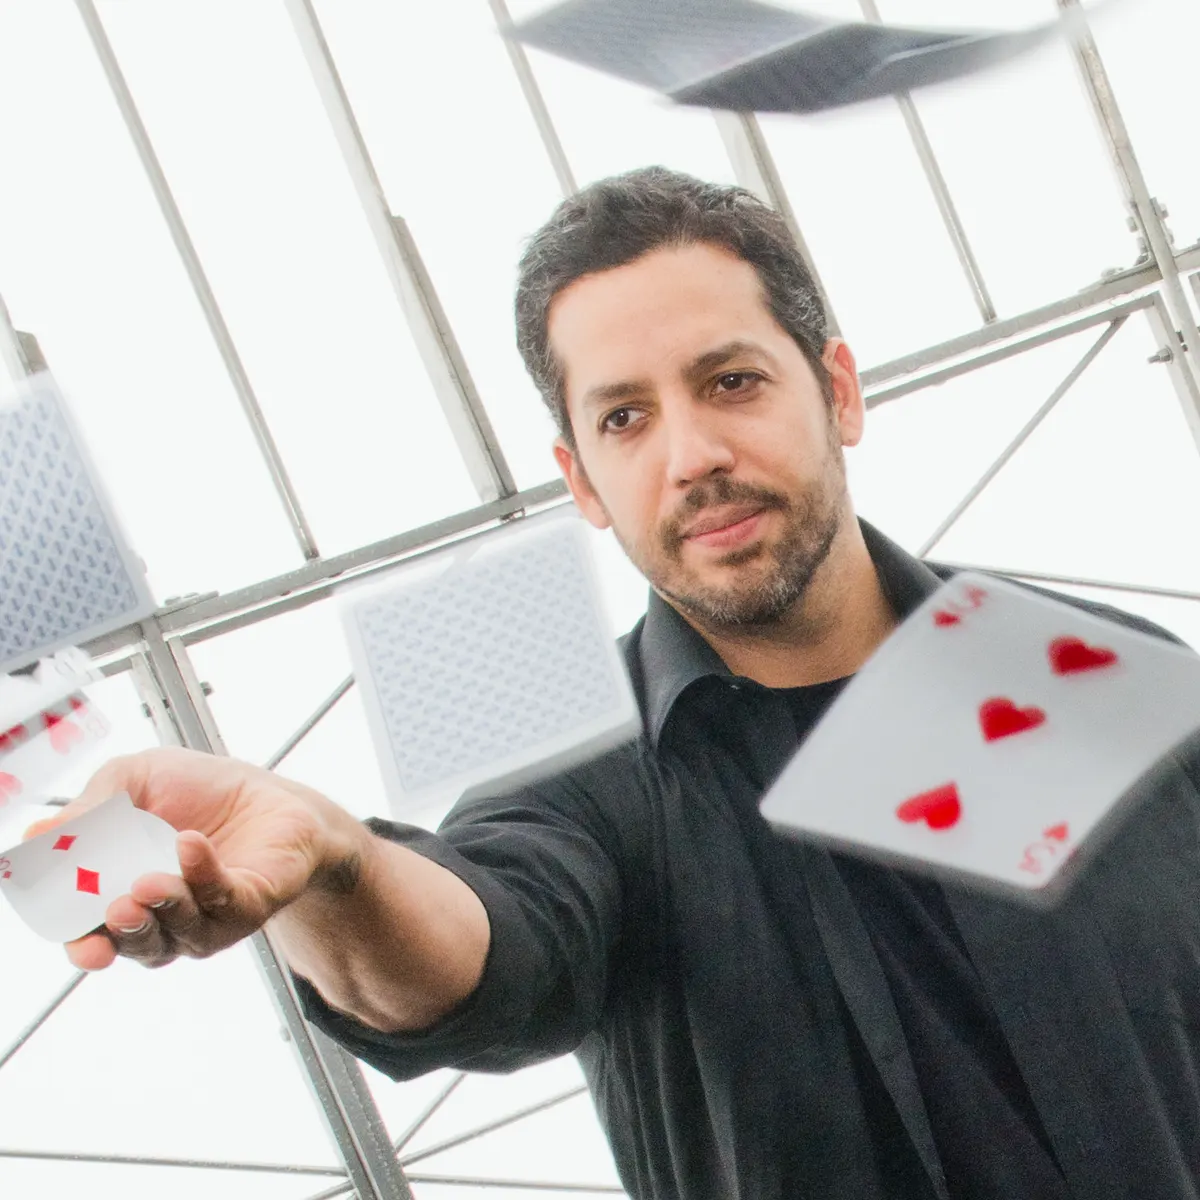 This is David Blaine's second picture